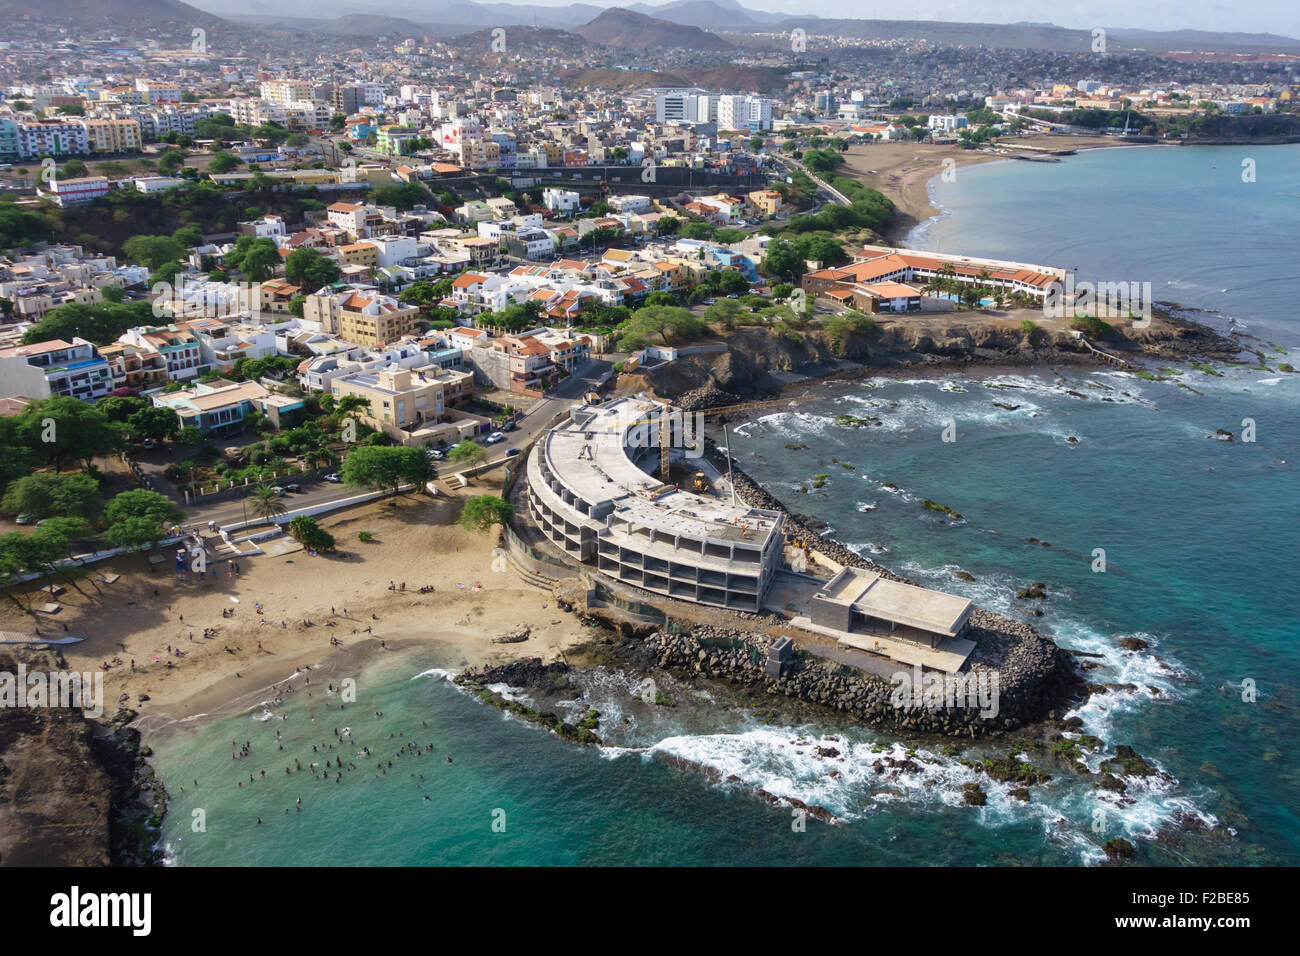 Capital Of Cape Verde High Resolution Stock Photography and Images - Alamy